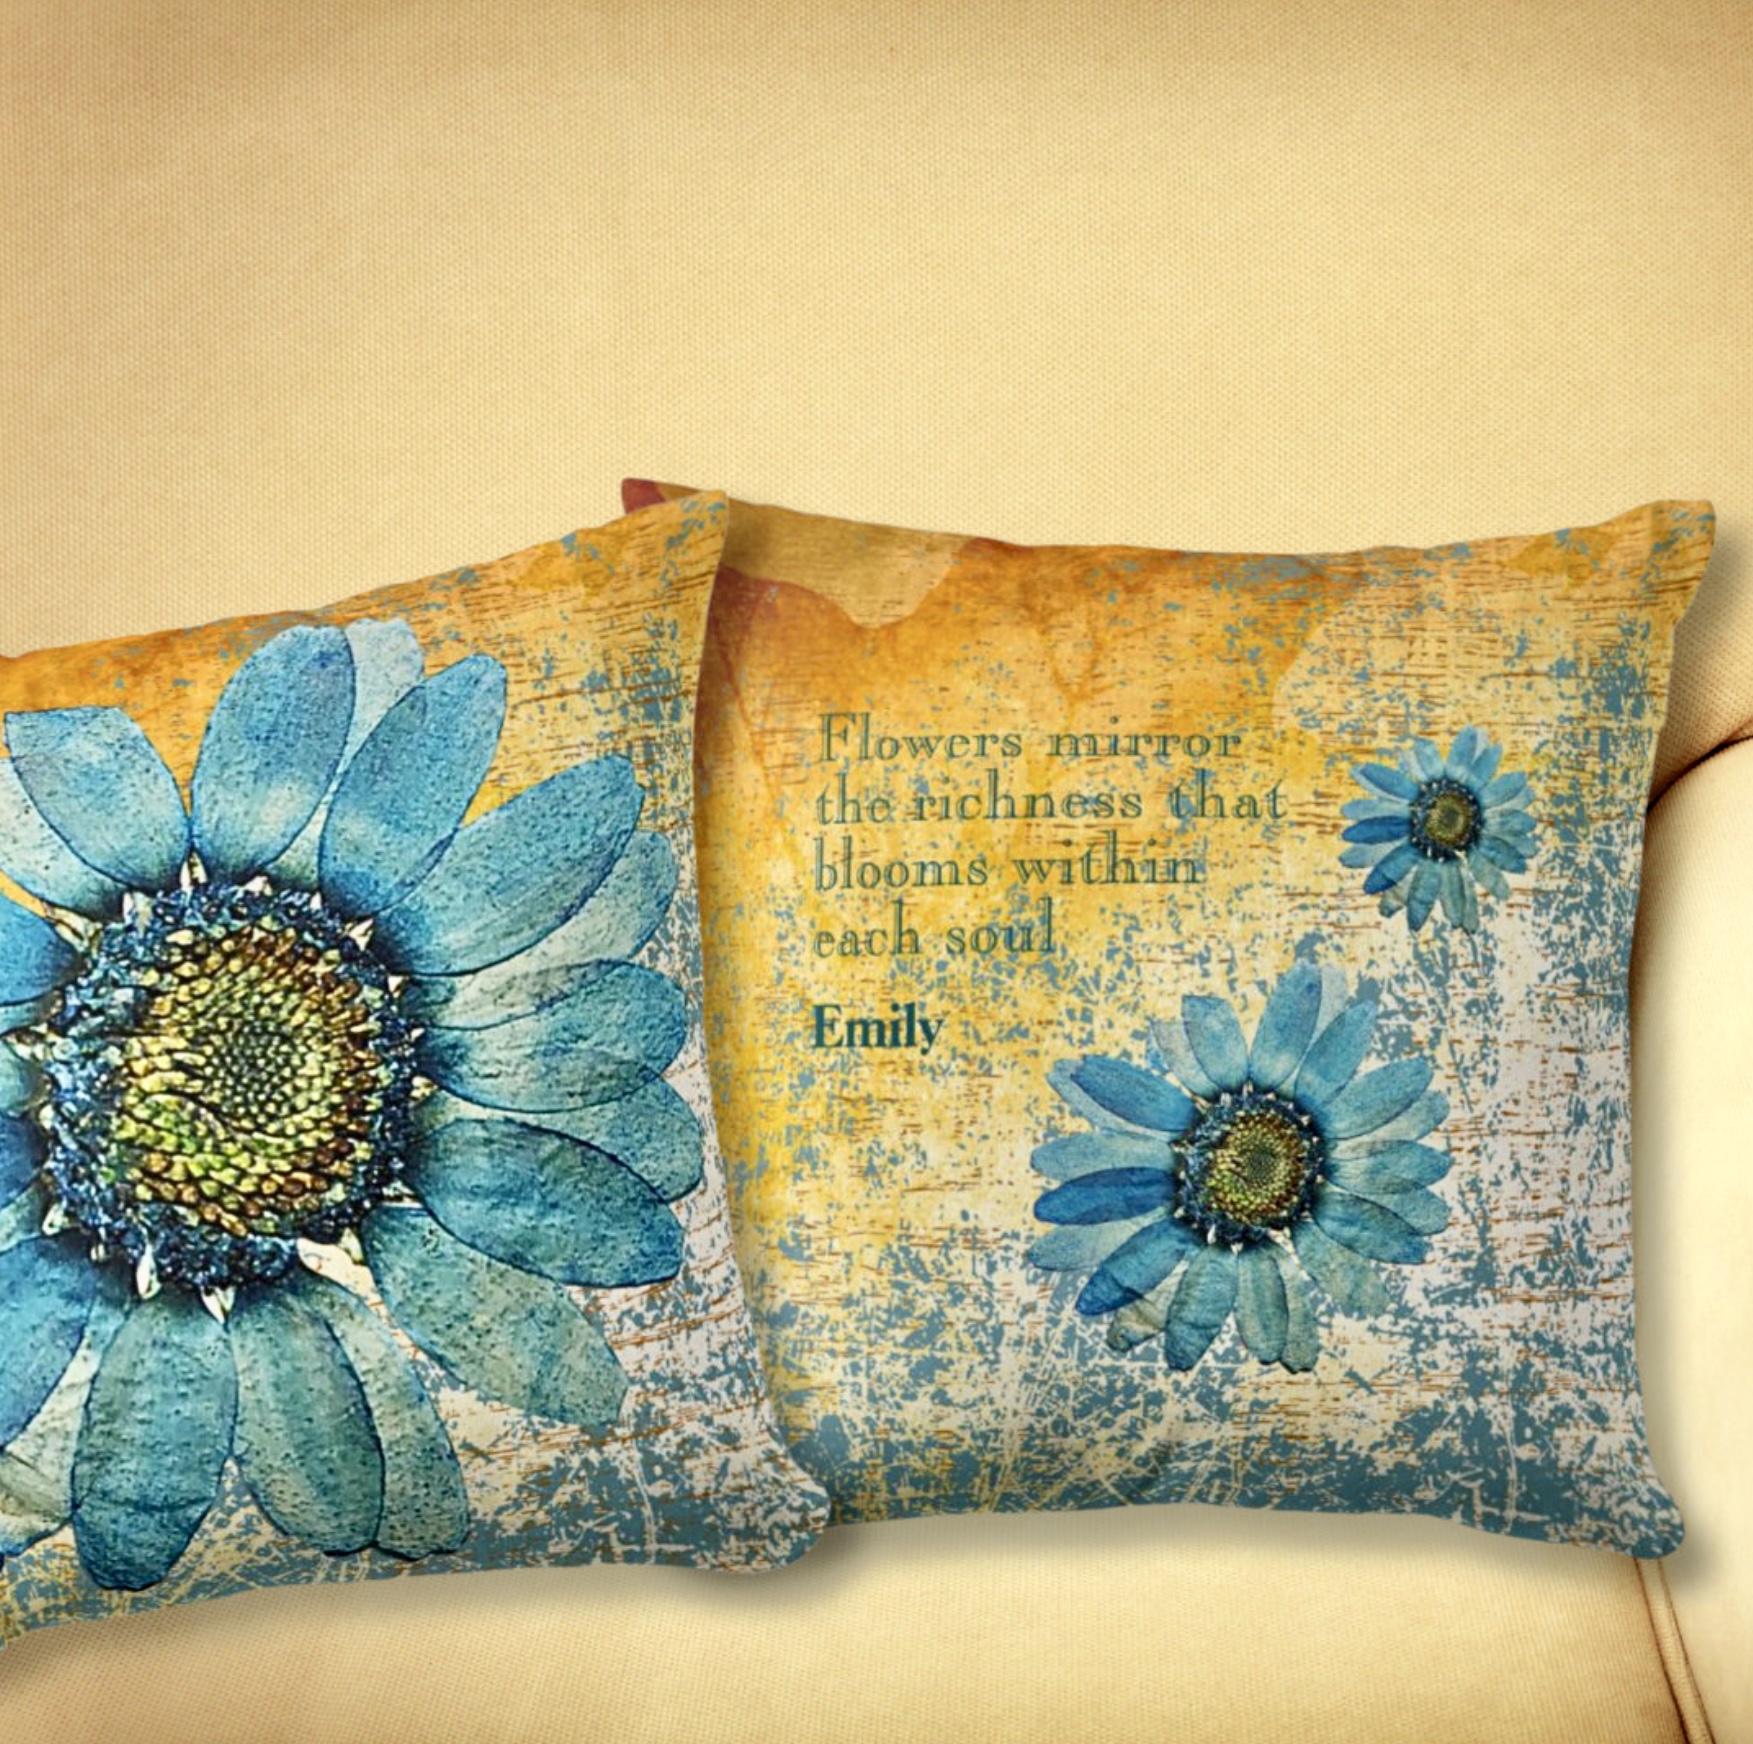 Two double sided blue flowers pillows with inspirational quote.